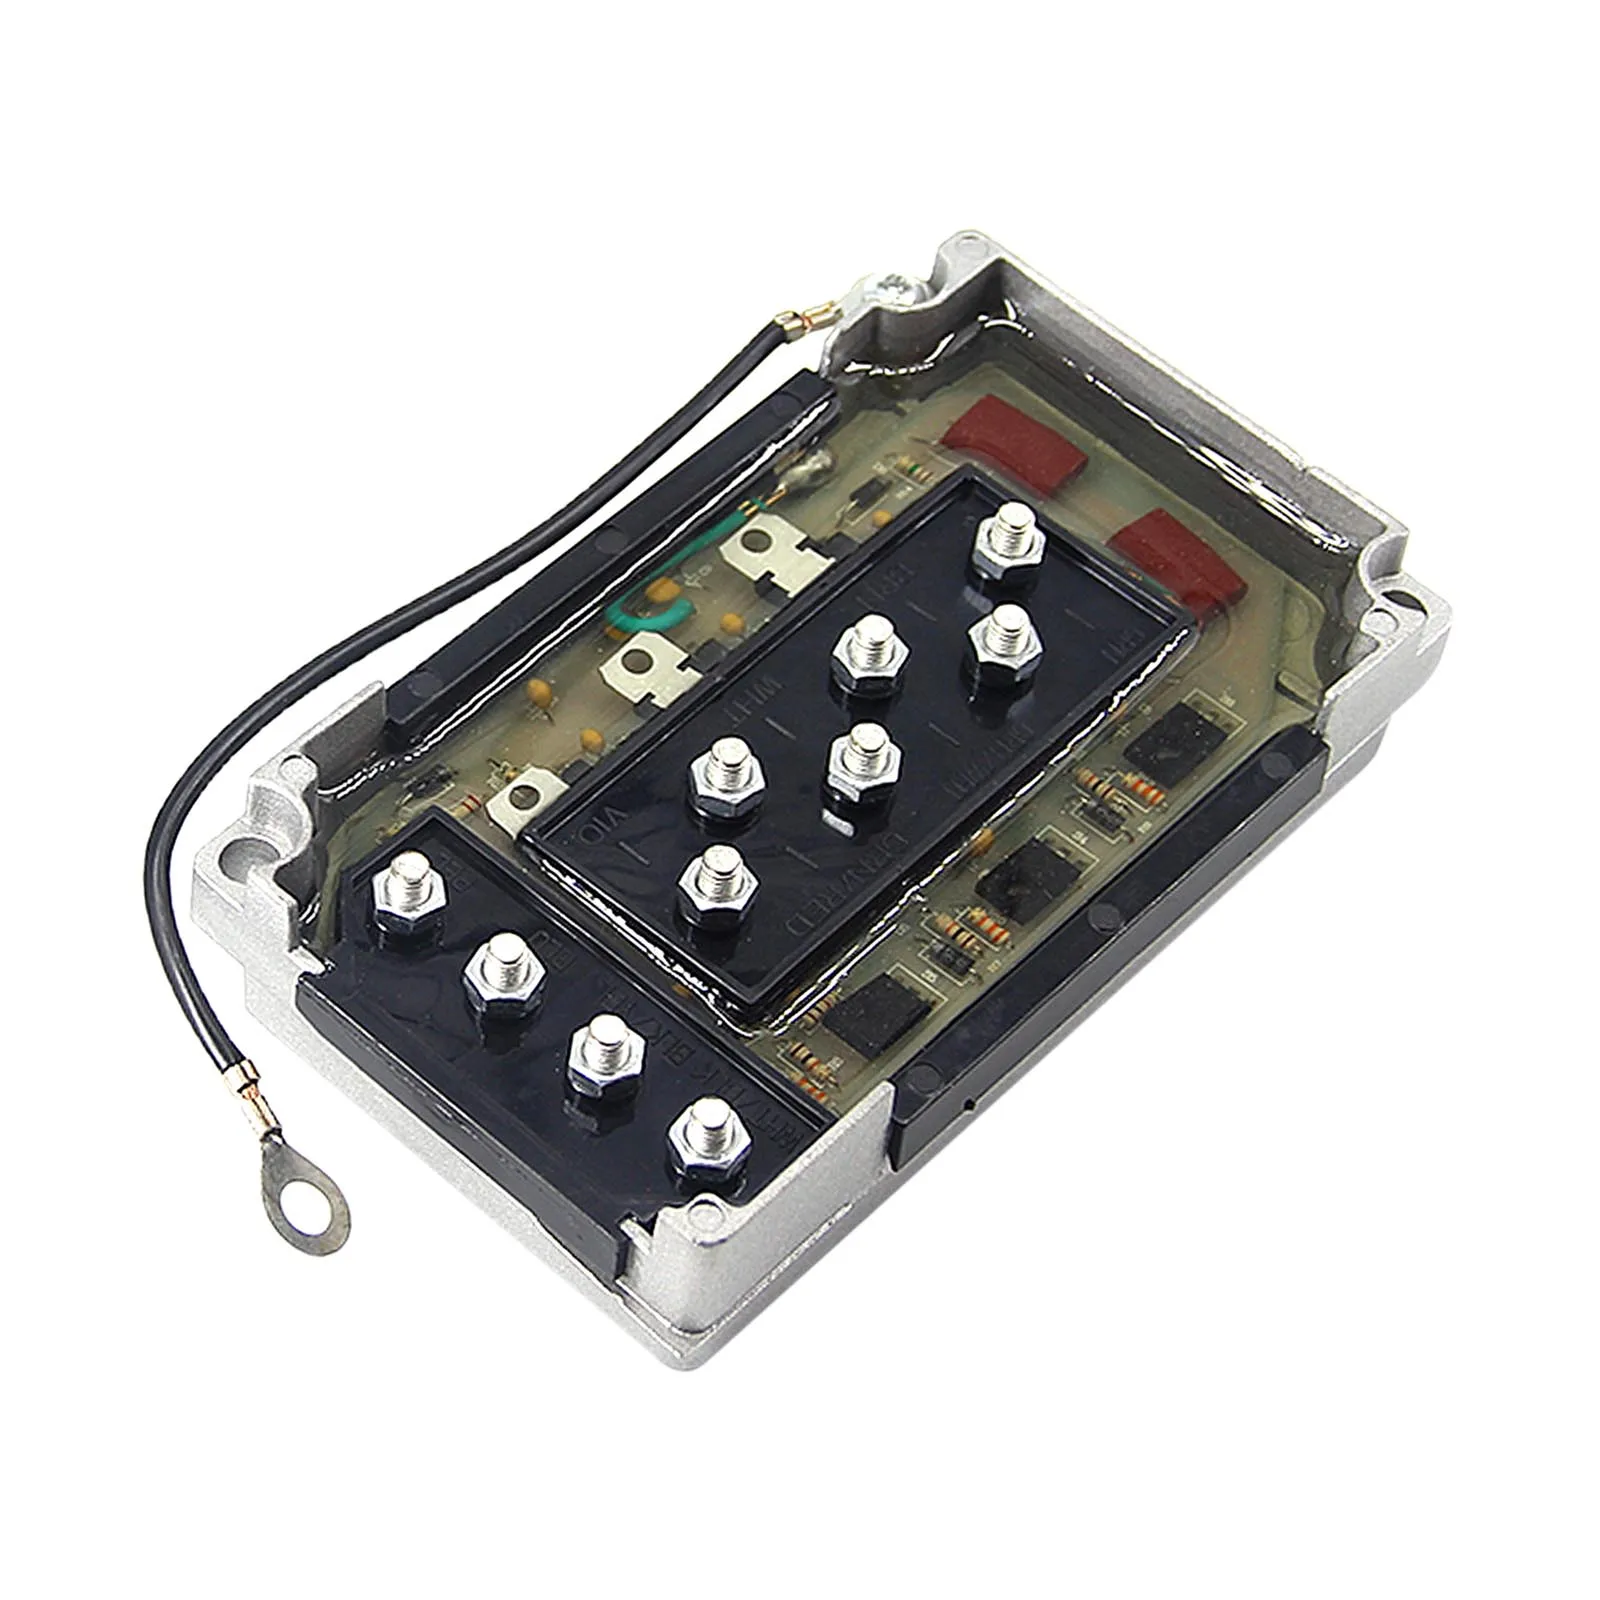 

CDI Switch Box for Mercury 50-275 HP Outboard Motor 90/115/150/200 HP Power Pack 18-5775 332-7778A12 332-7778A6